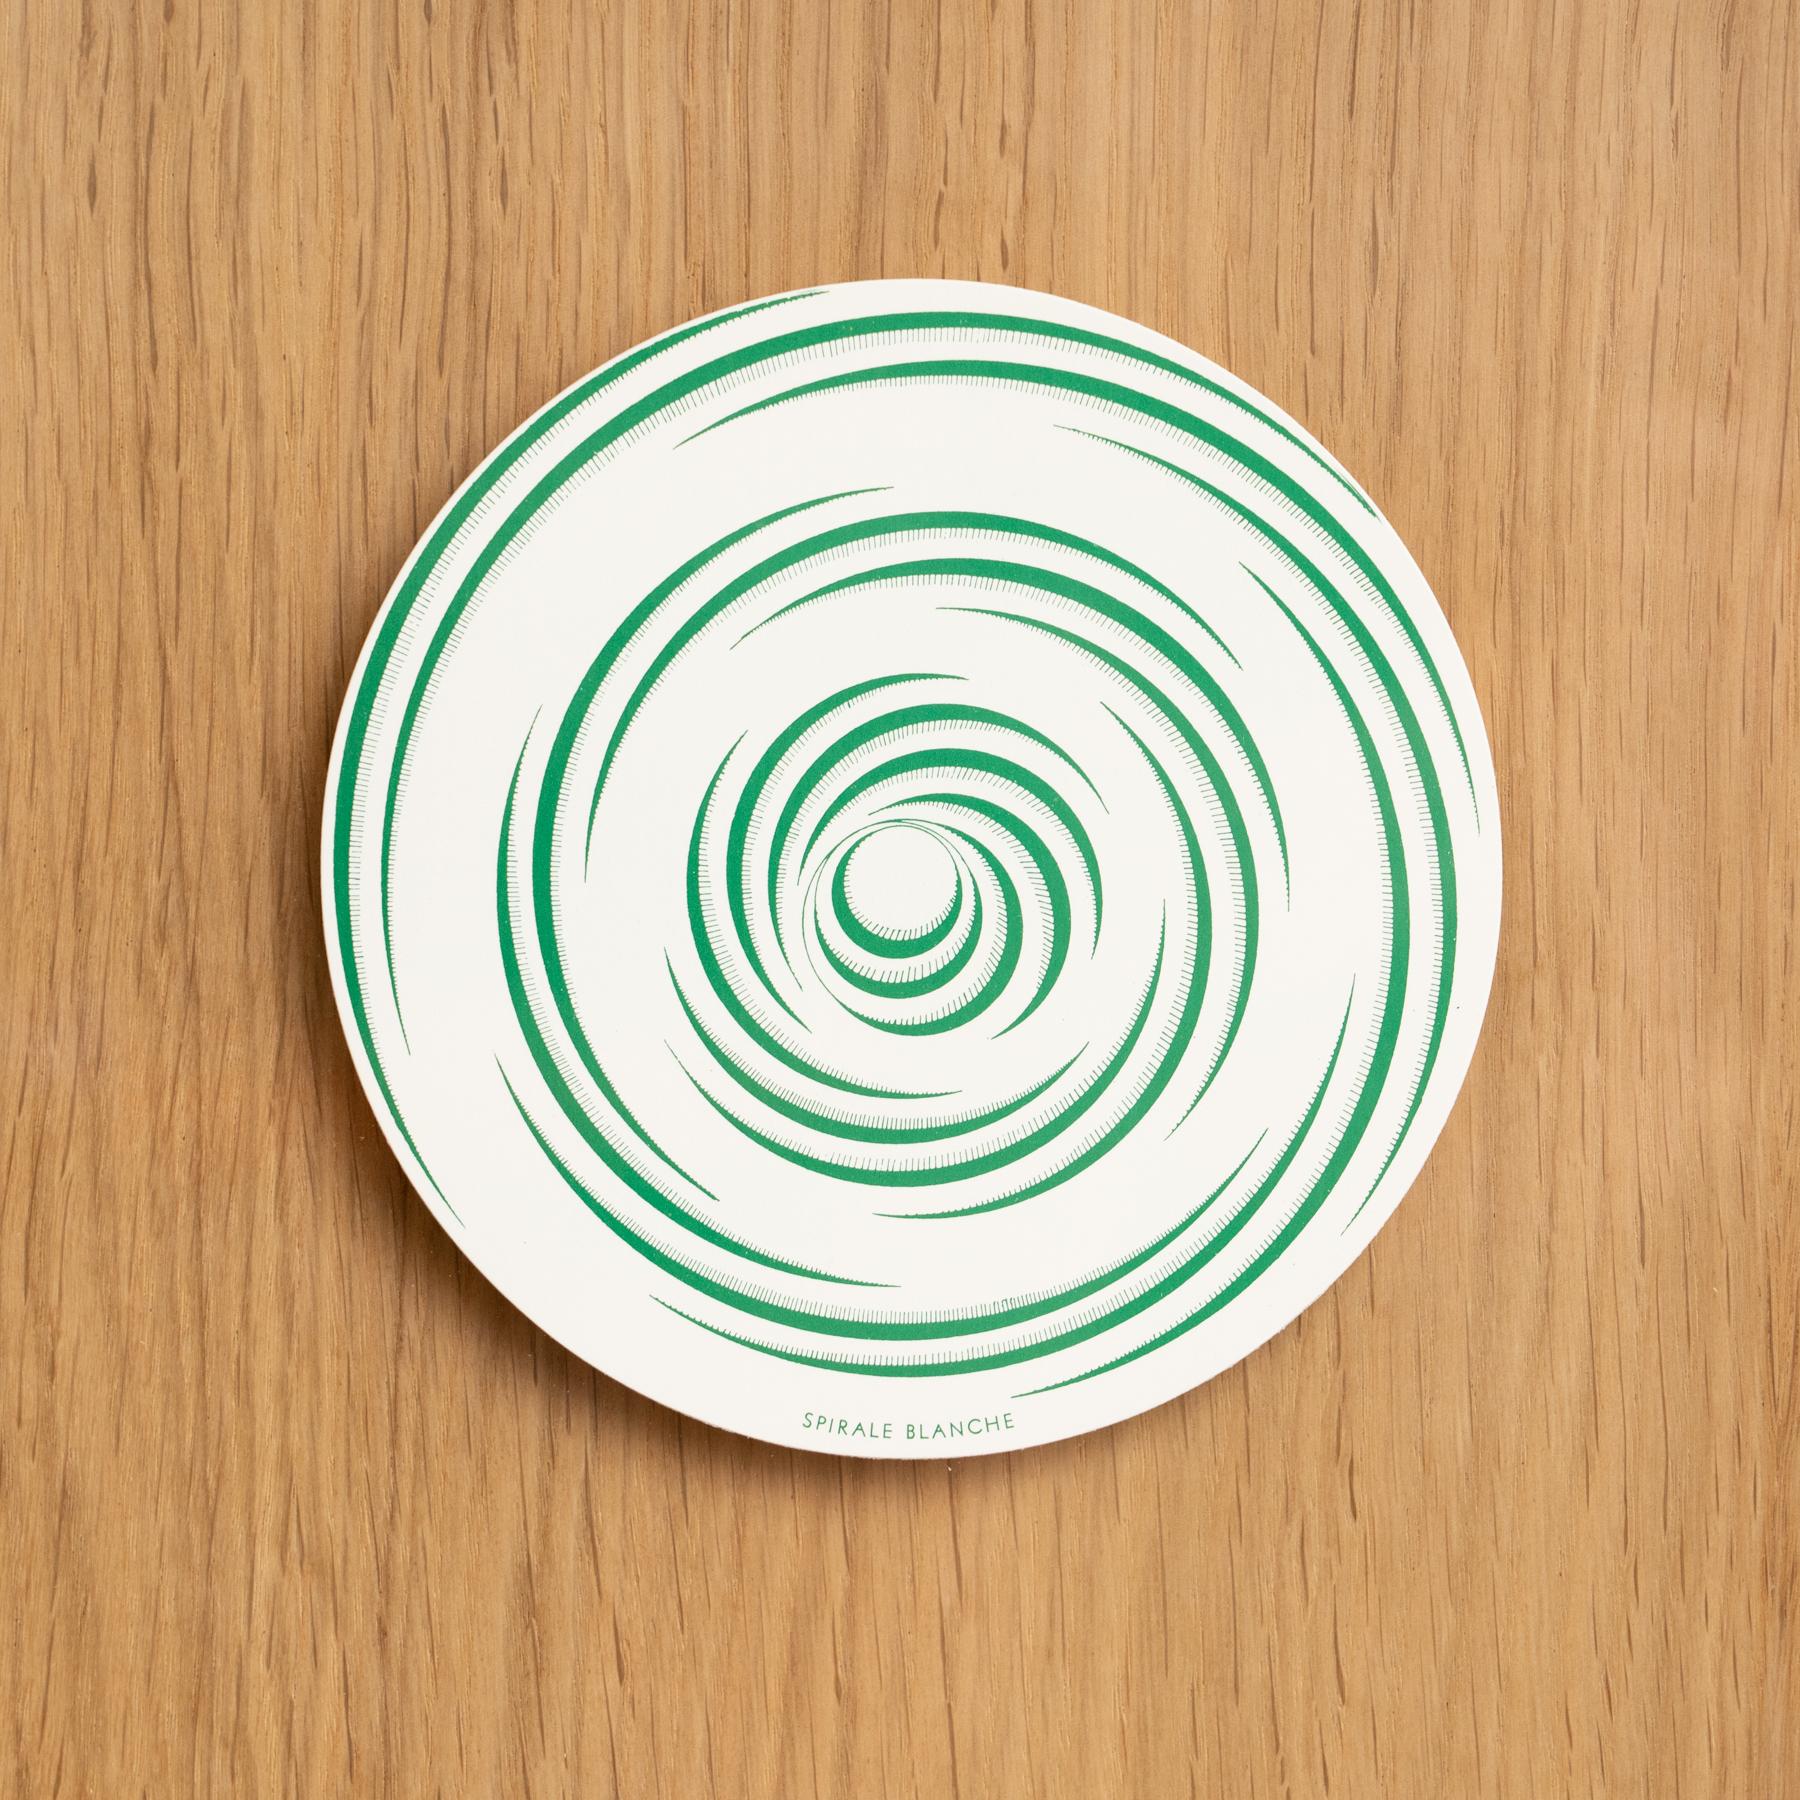 Marcel Duchamp Green White Spirale Blanche Rotorelief by Konig Series 133, 1987 In Good Condition For Sale In Barcelona, Barcelona